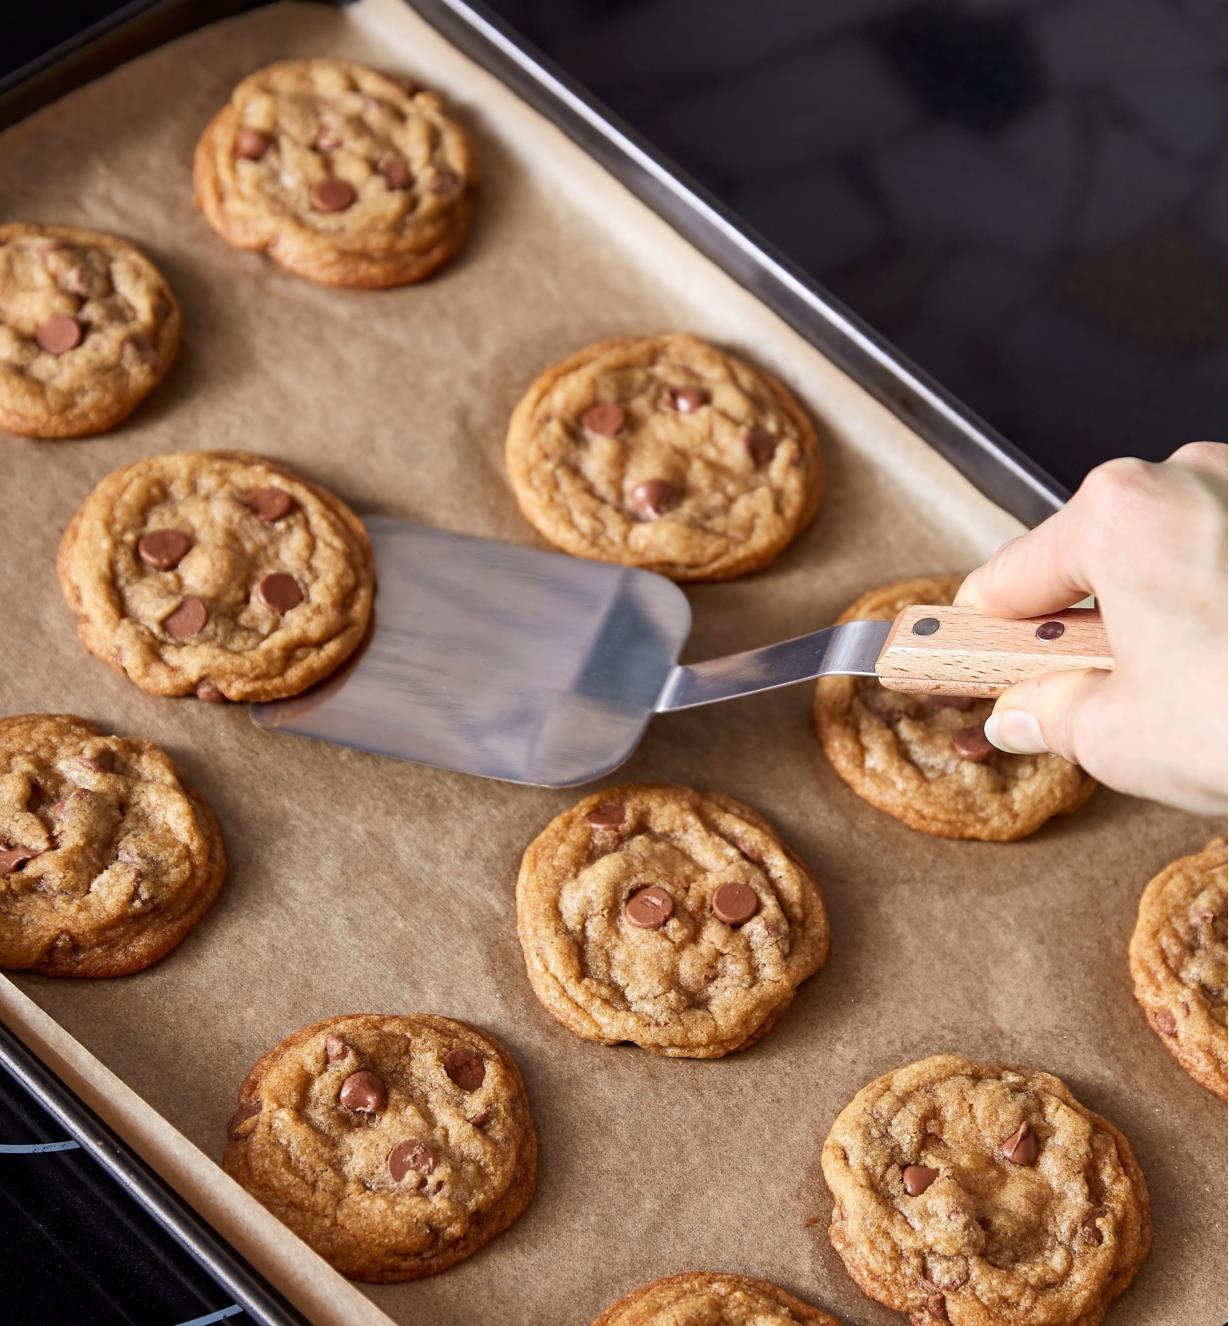 Stainless-Steel Spatula sliding under a cookie on a baking sheet